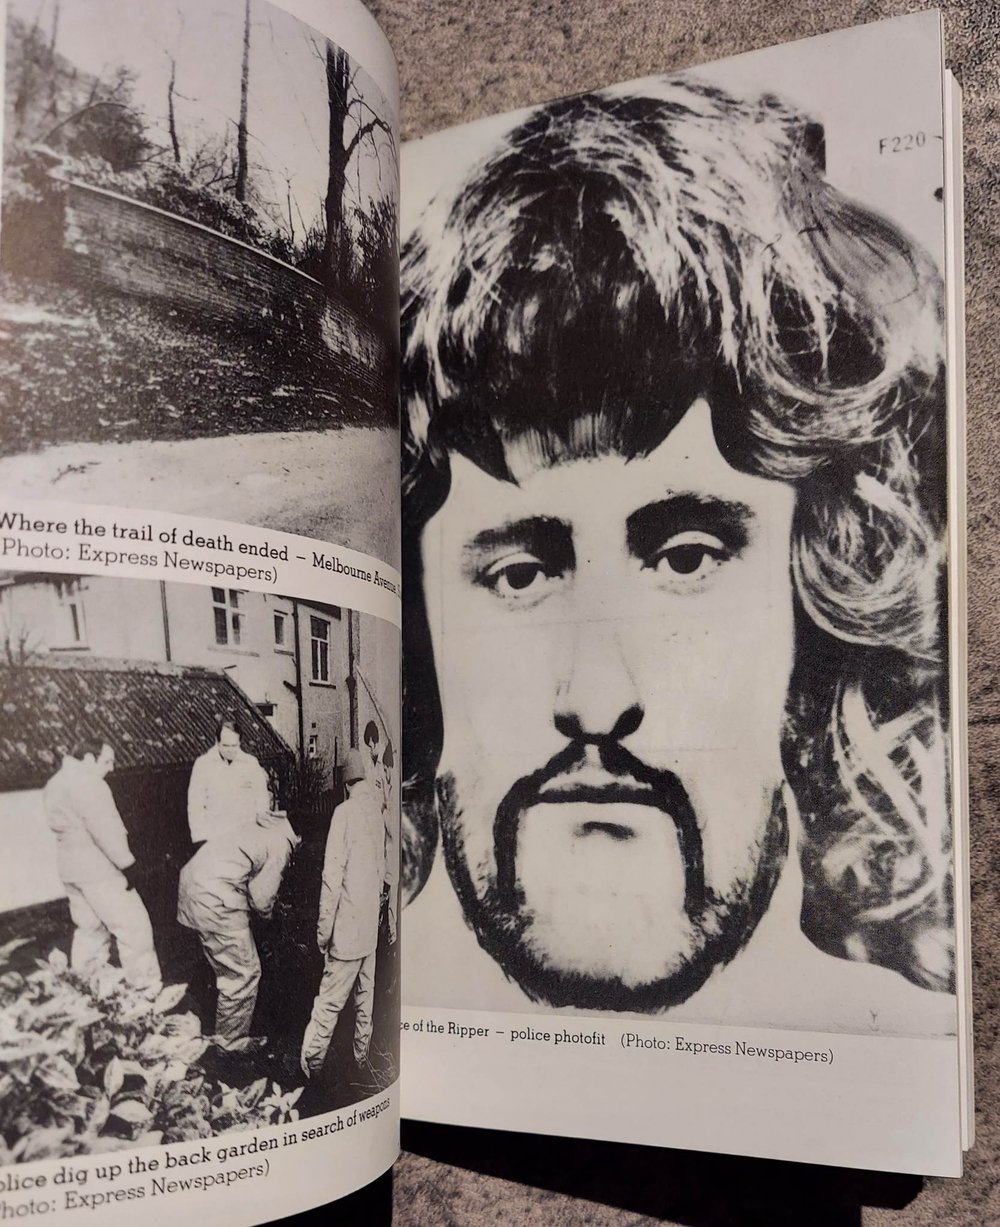 The Yorkshire Ripper Story, by John Beattie